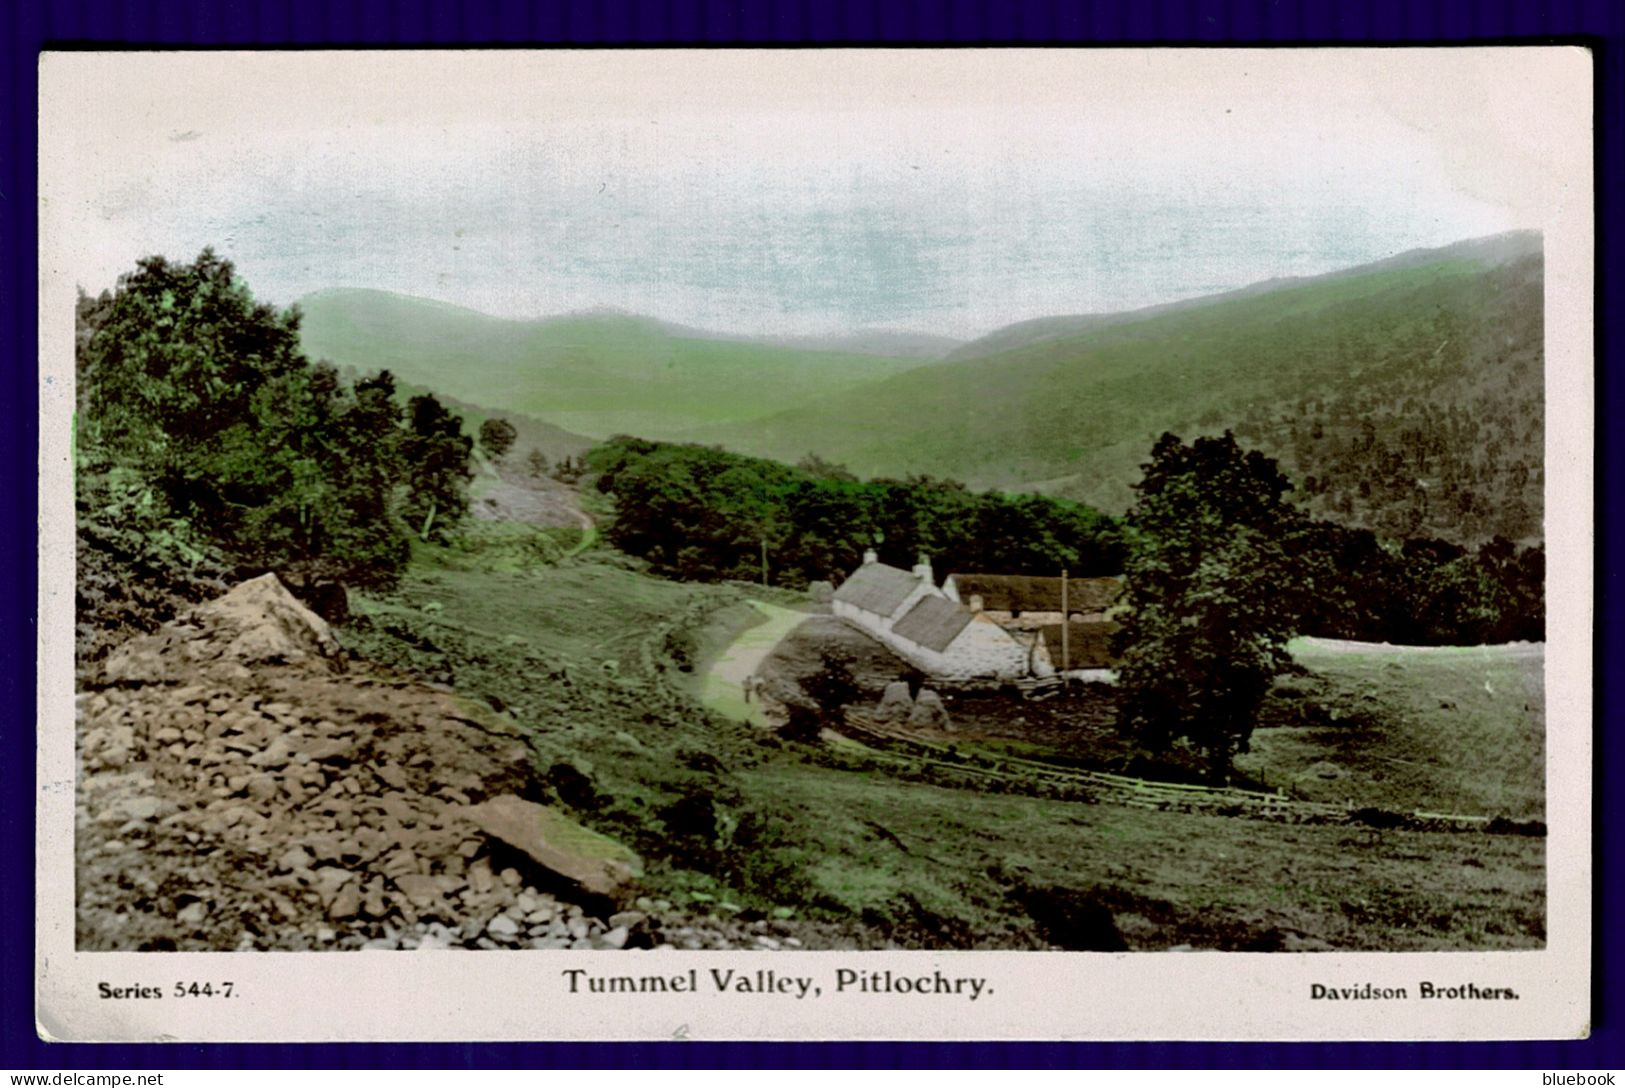 Ref 1646 - Early Real Photo Postacrd - Tummel Valley & Farm - Pitlochry Perthshire Scotland - Perthshire